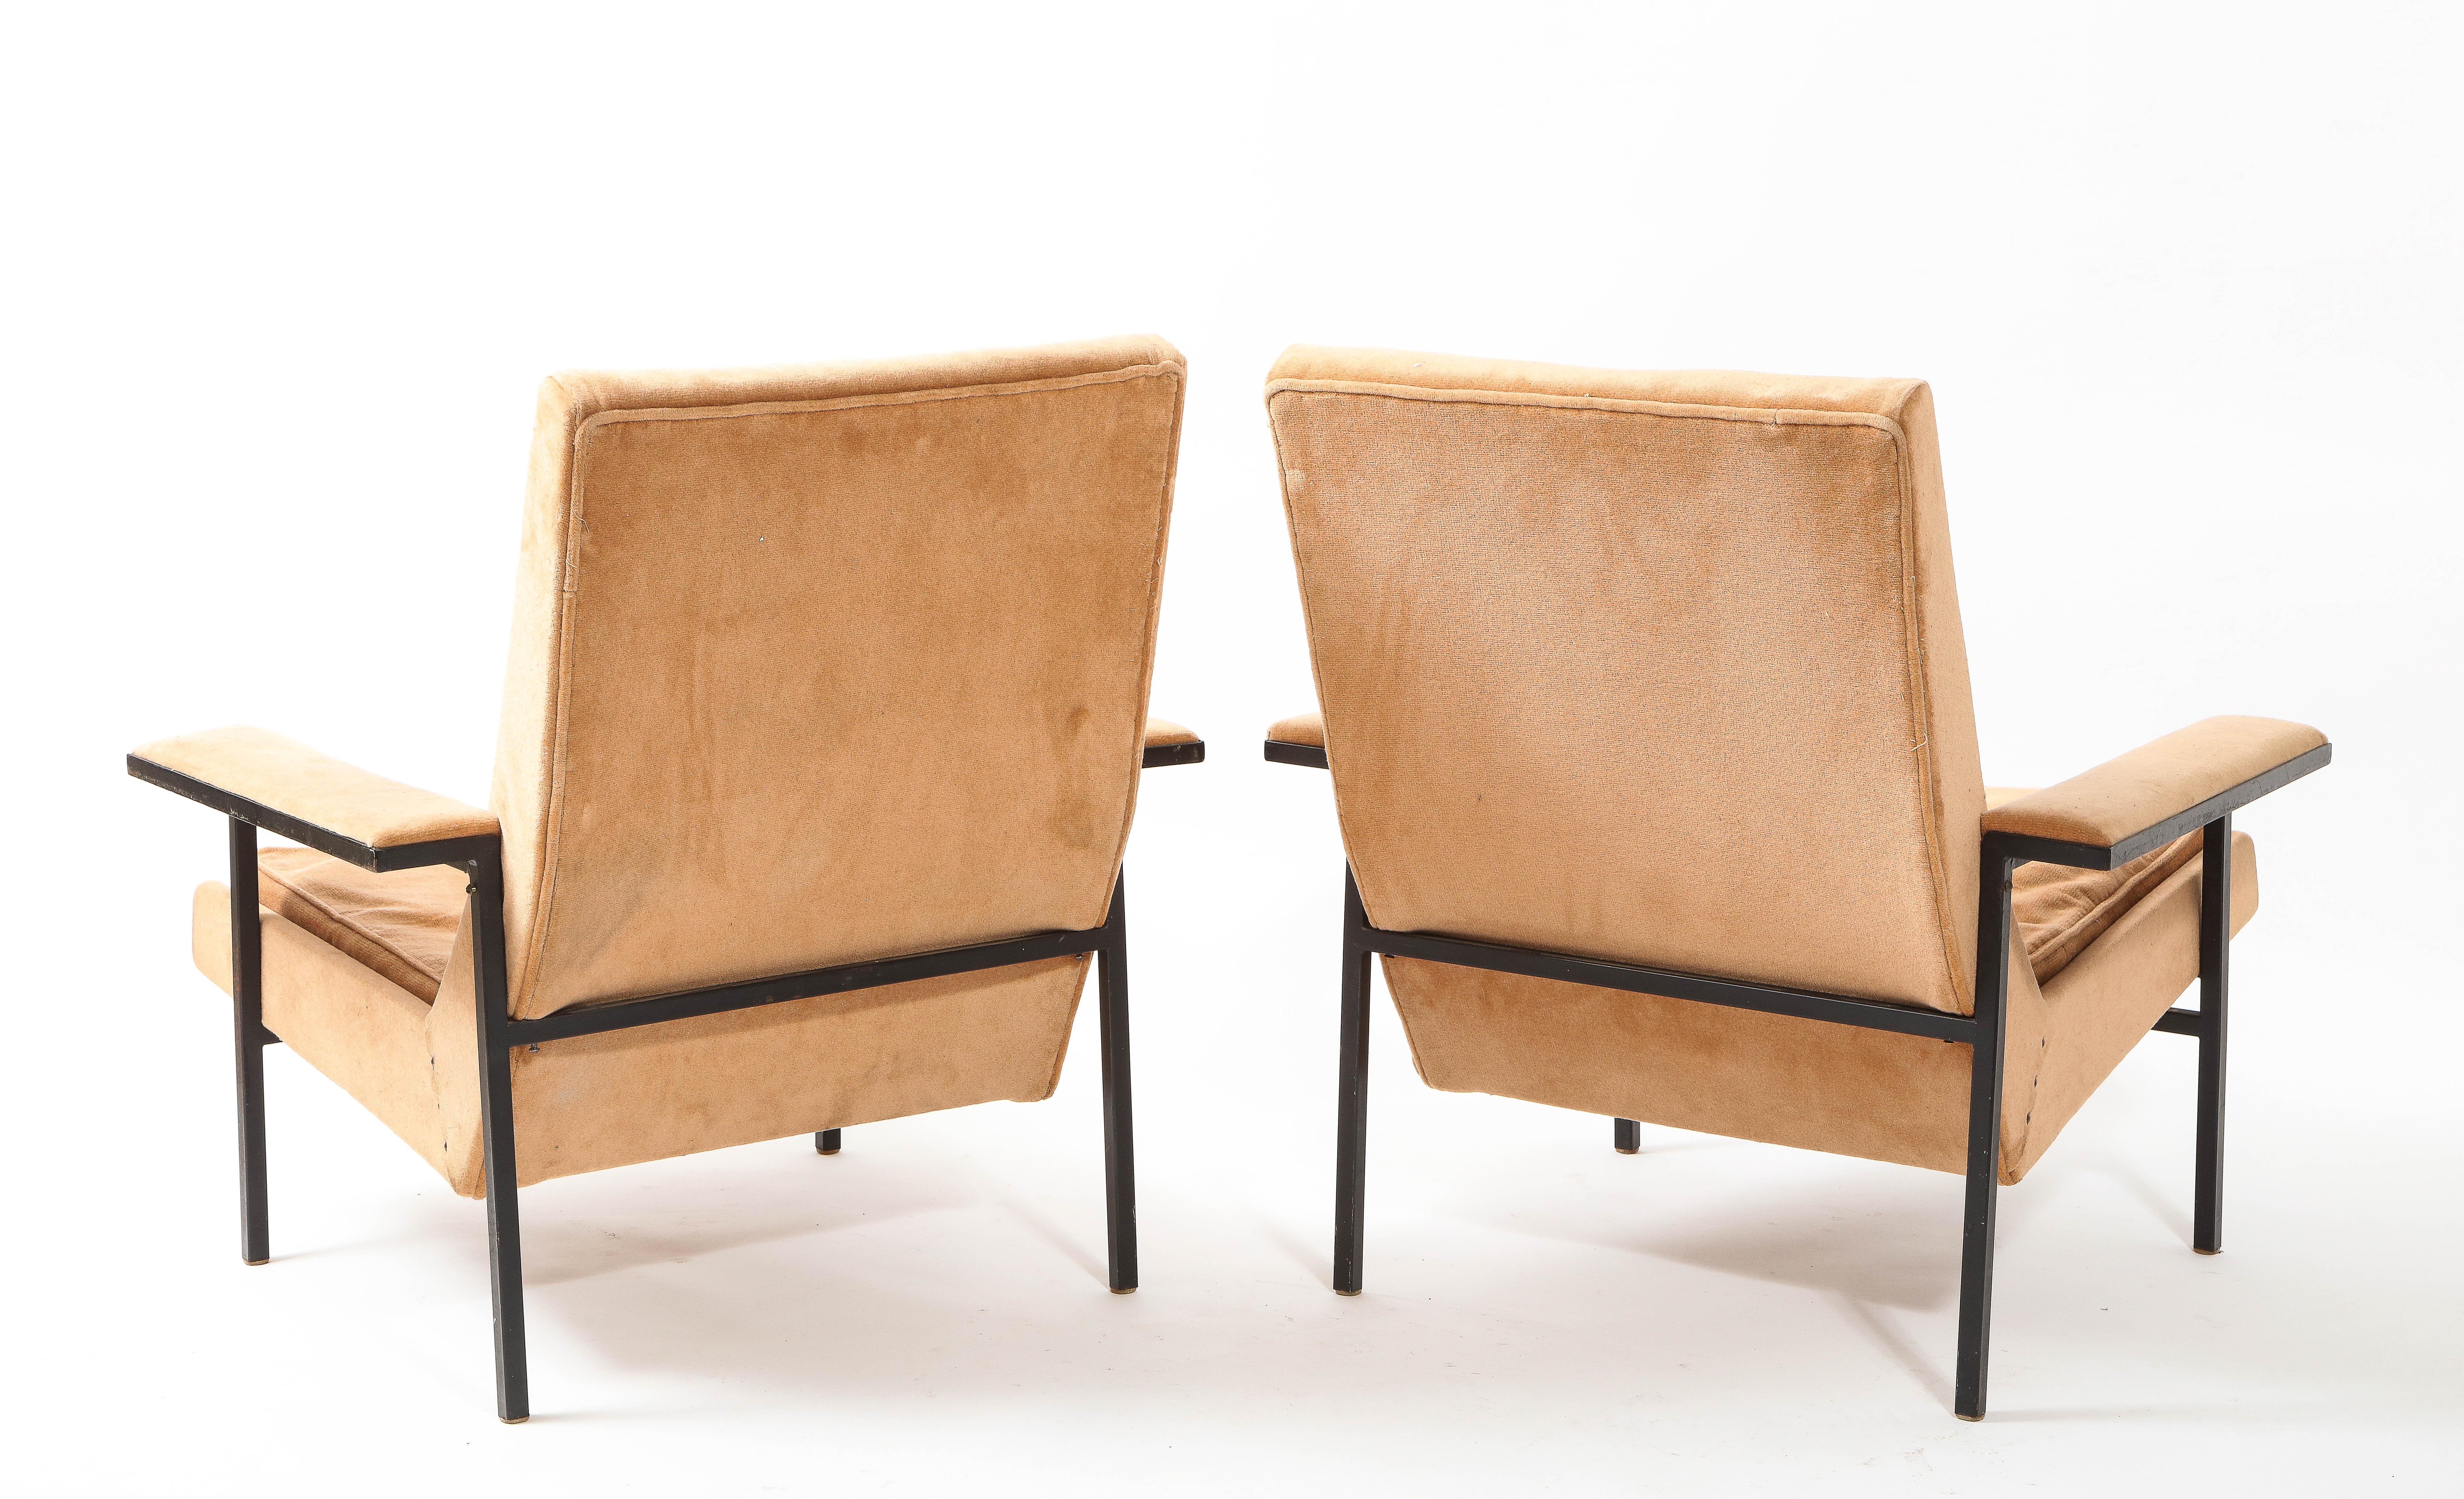 A.R.P Guariche, Motte, Mortier Pair of Armchairs, France 1955 For Sale 1